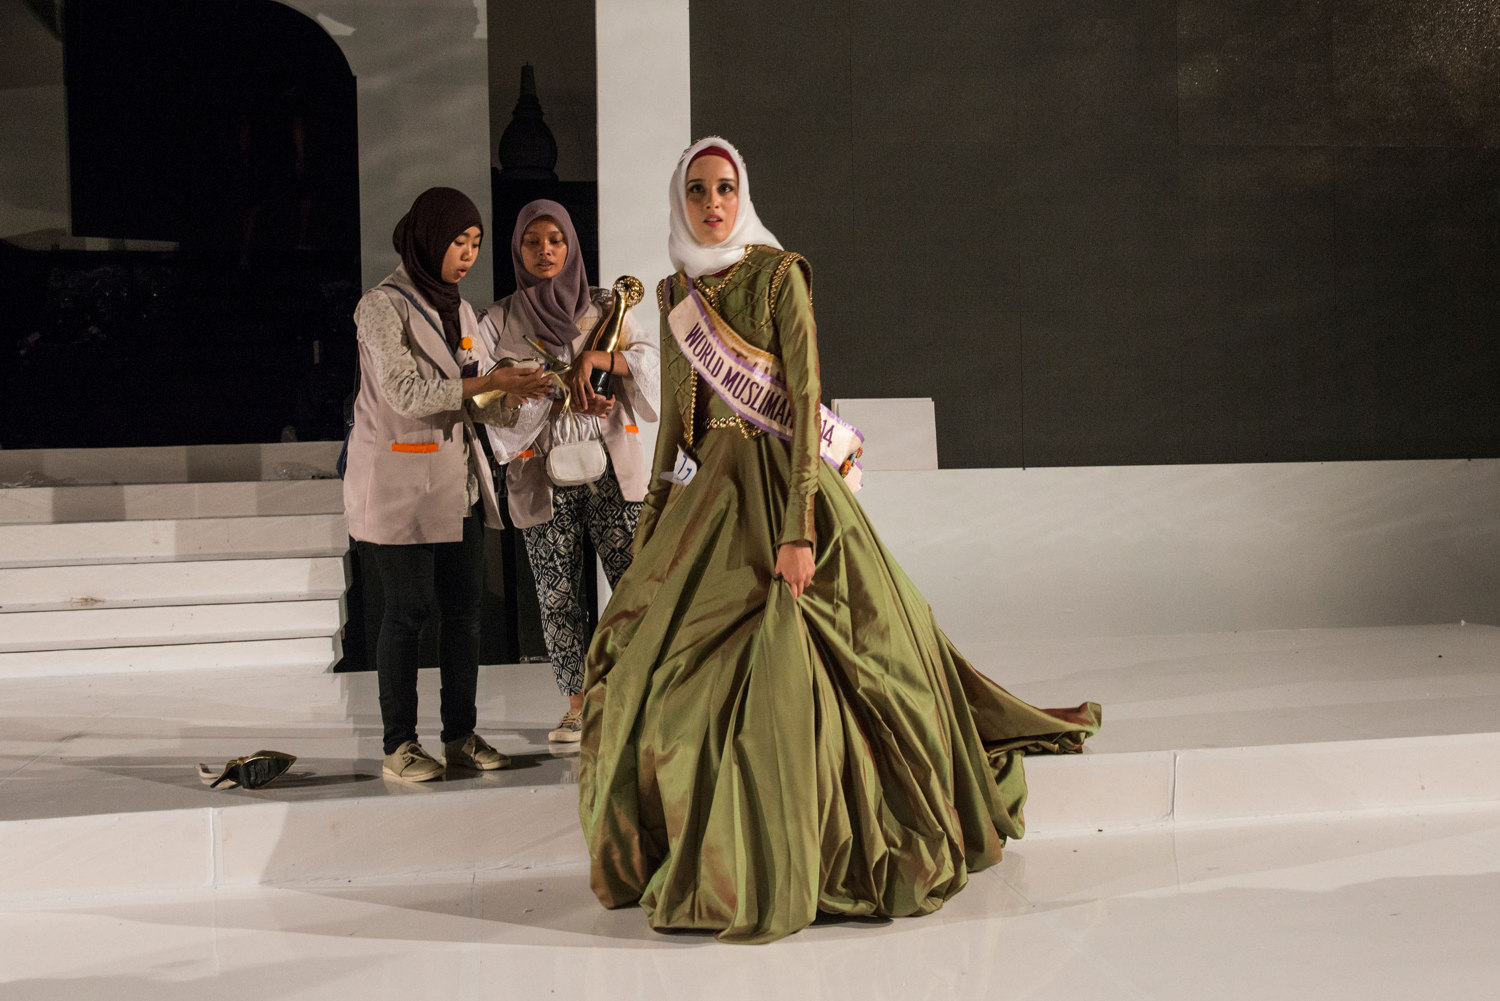  After the event is over, Miss Muslimah 2014- Fatma Ben Guefrache of Tunisia looks around the empty stage. The Grand Finale of the Miss Muslimah World Competition on November 21st, 2014 in Yogakarta, Indonesia. 